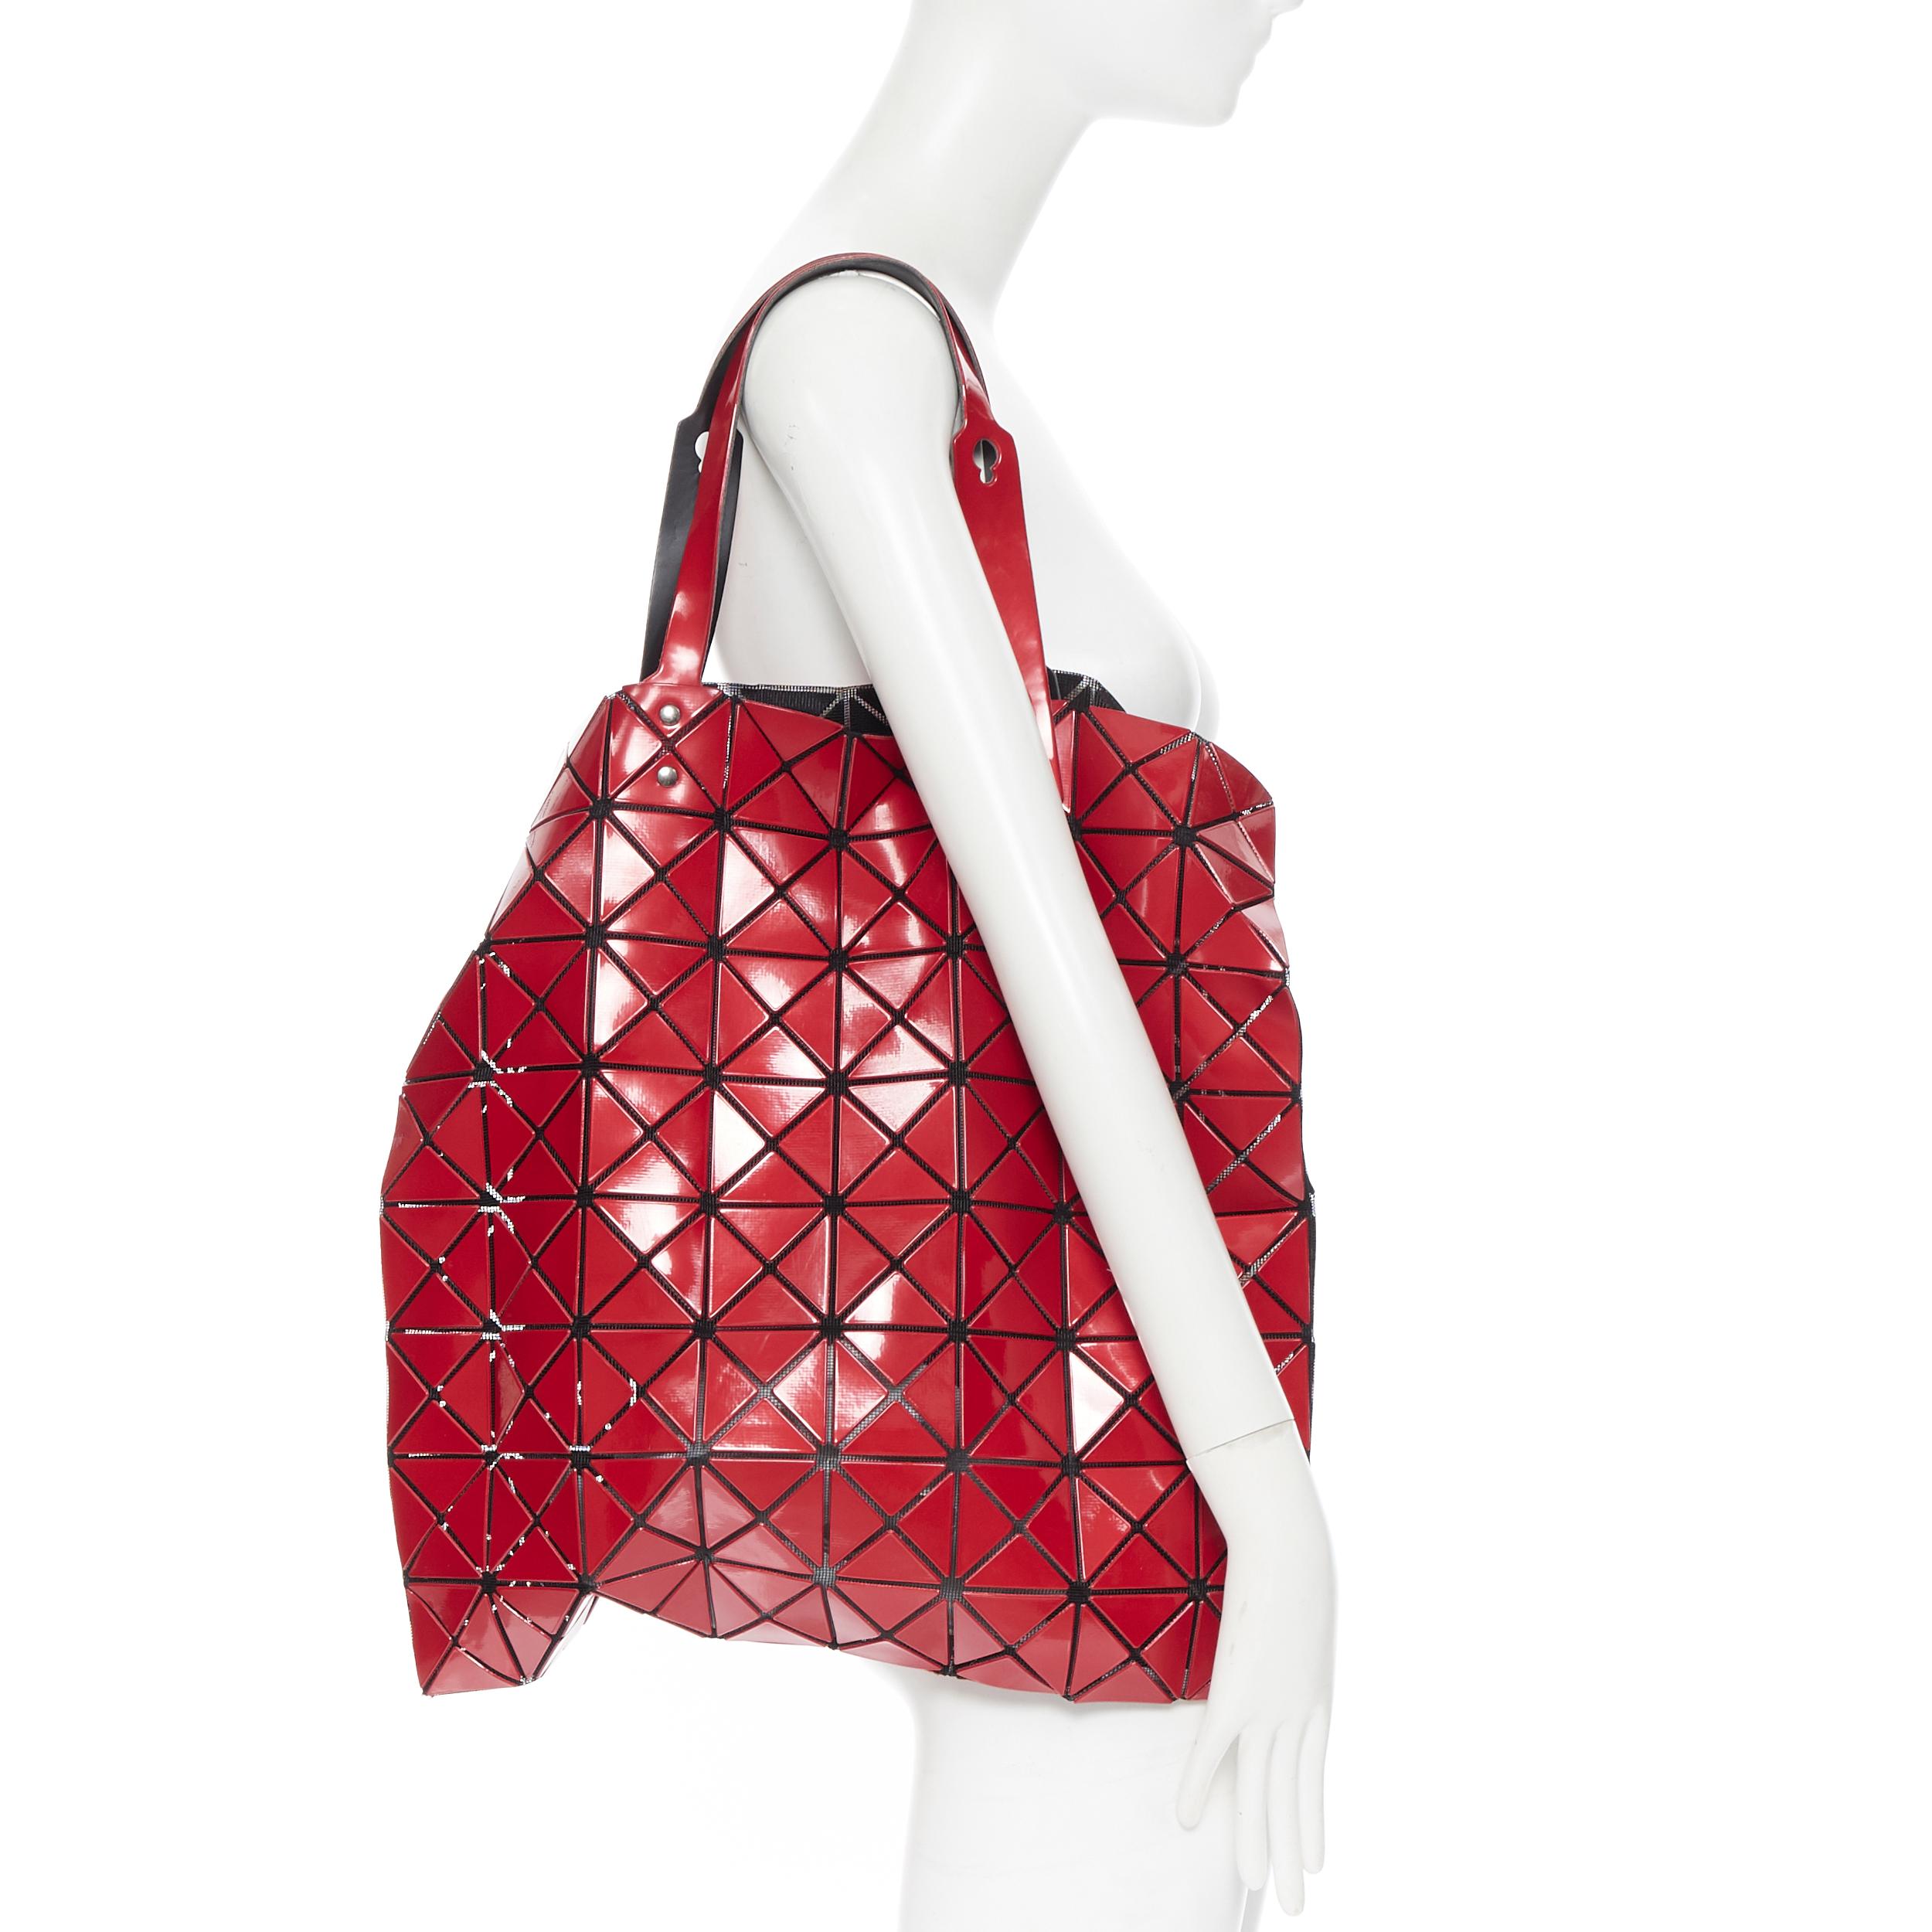 BAO BAO ISSEY MIYAKE Prism red PVC geometric mesh leather handle tote bag
Brand: Bao Bao Issey Miyake
Model Name / Style: Prism
Material: PVC
Color: Red
Pattern: Solid
Extra Detail: Geometric triangular PVC chips embellished on black mesh net.